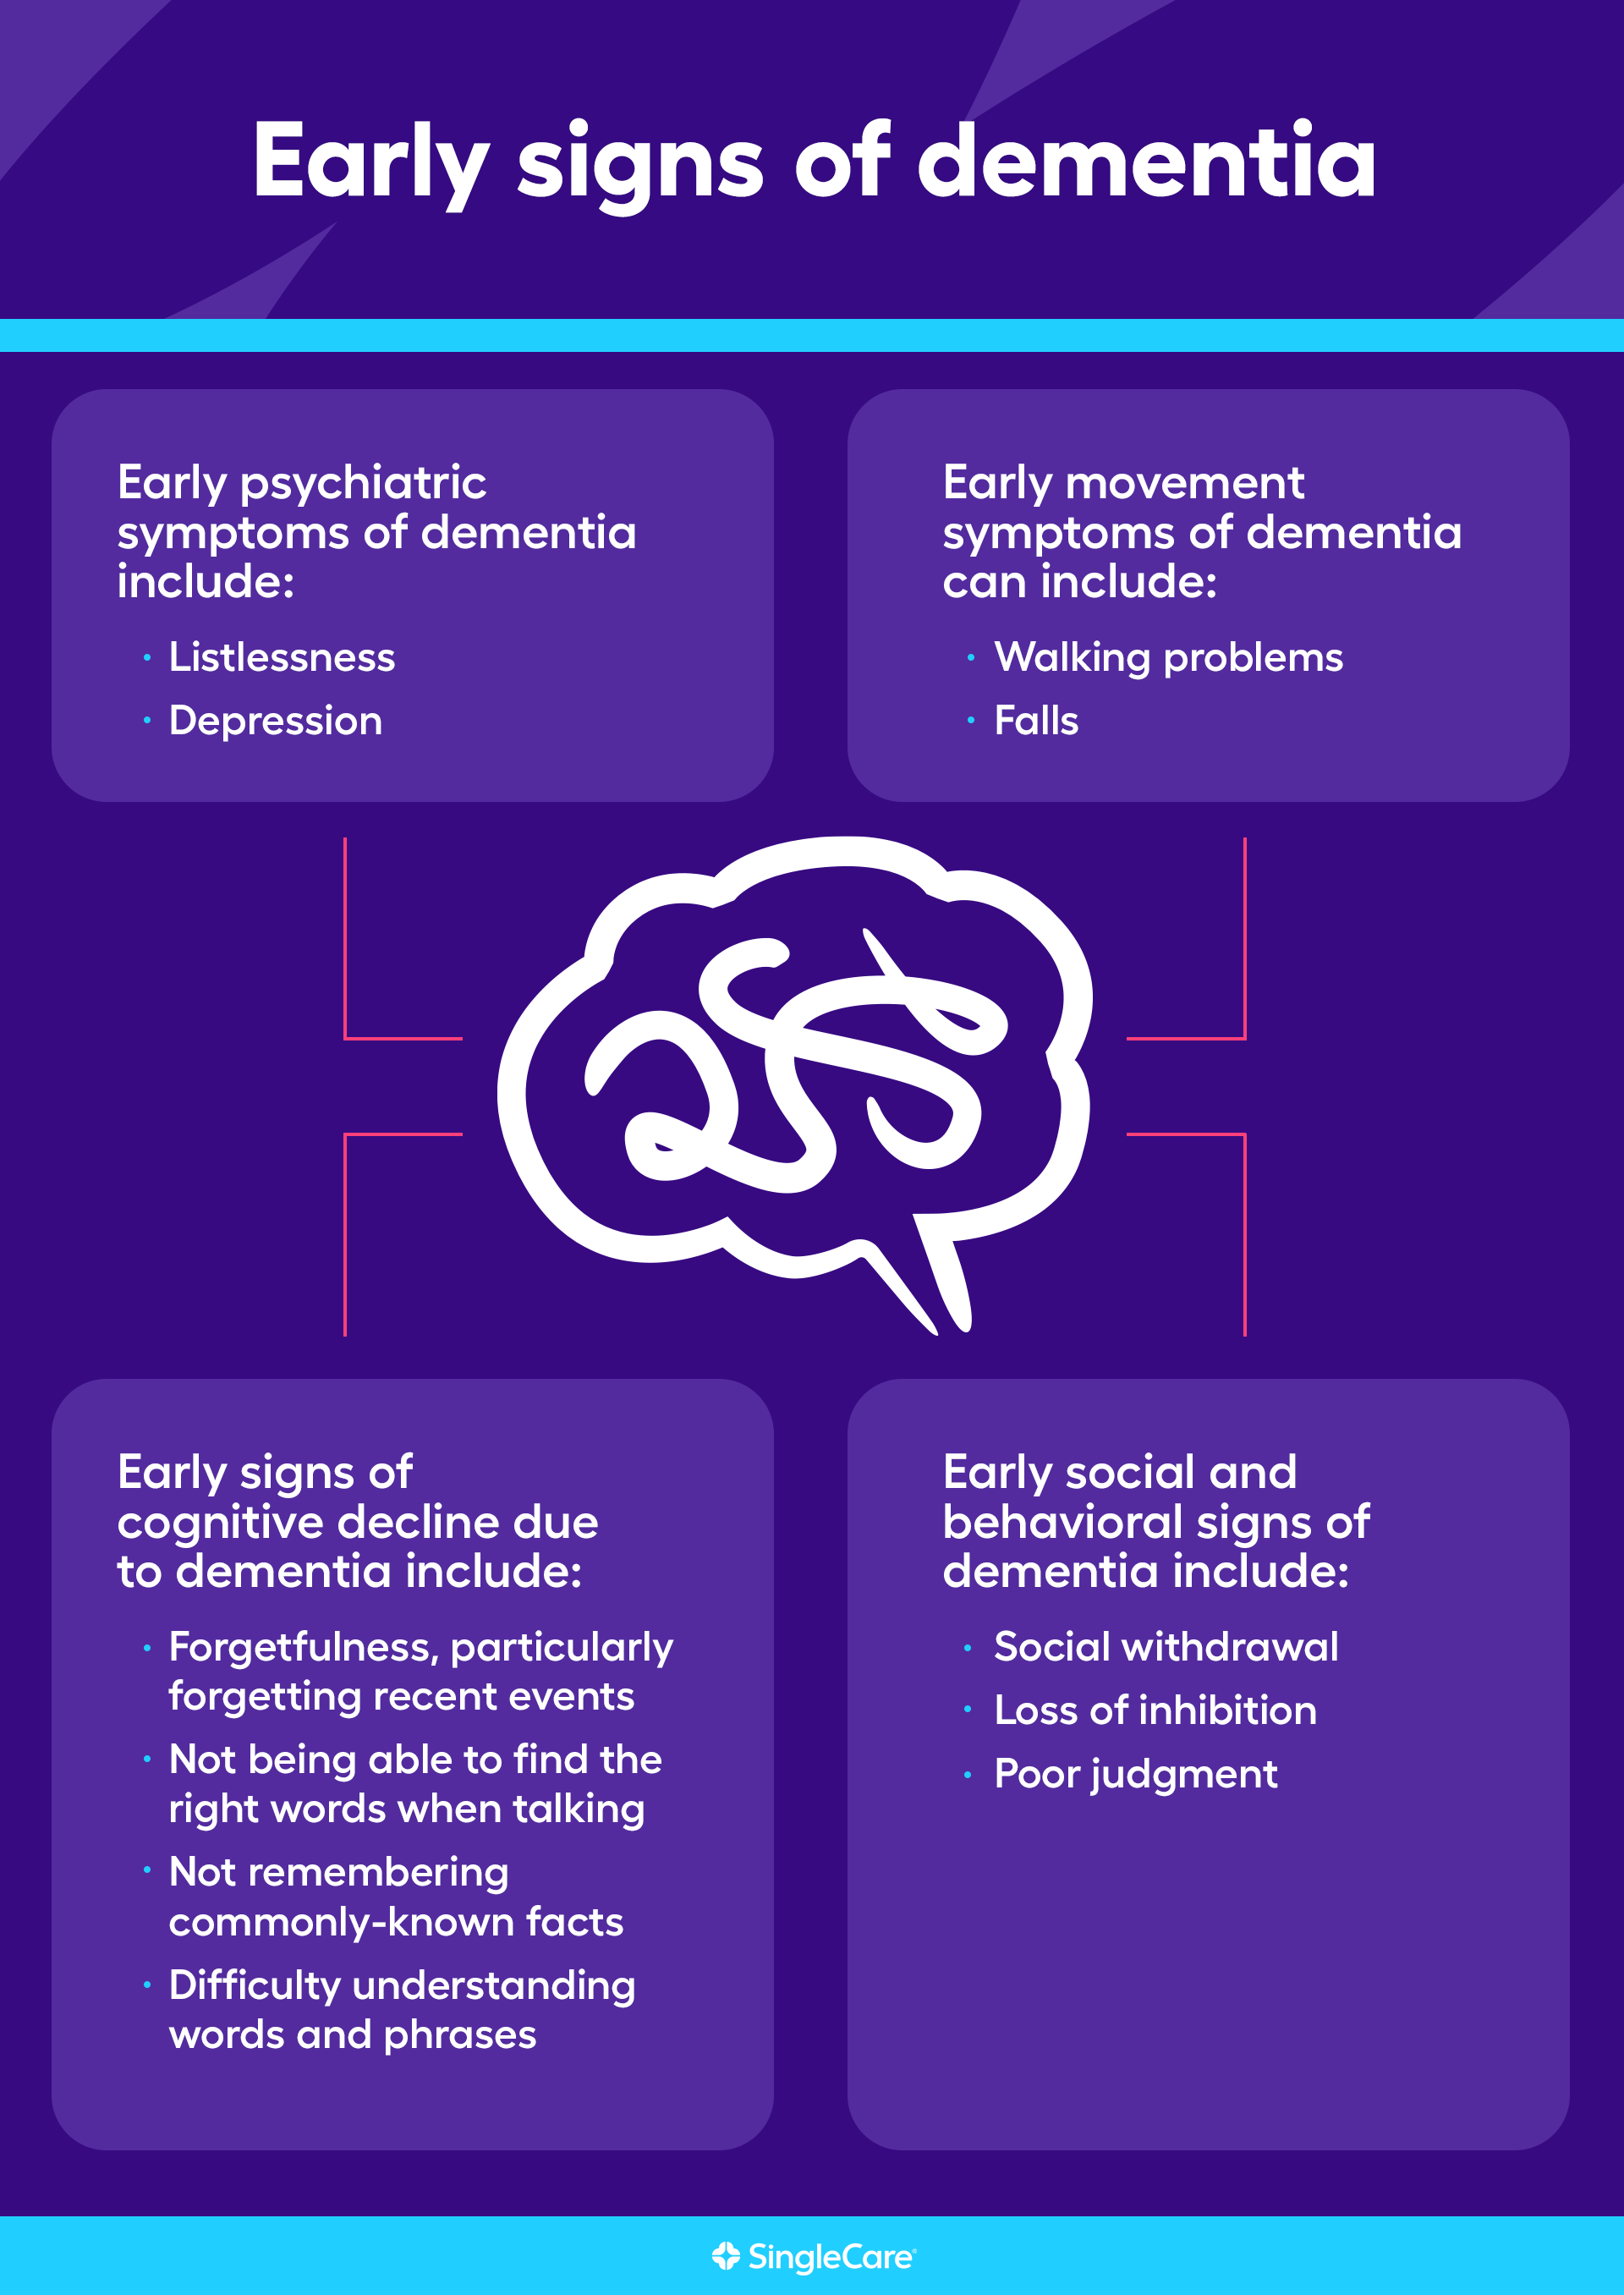 What are the early signs of dementia?